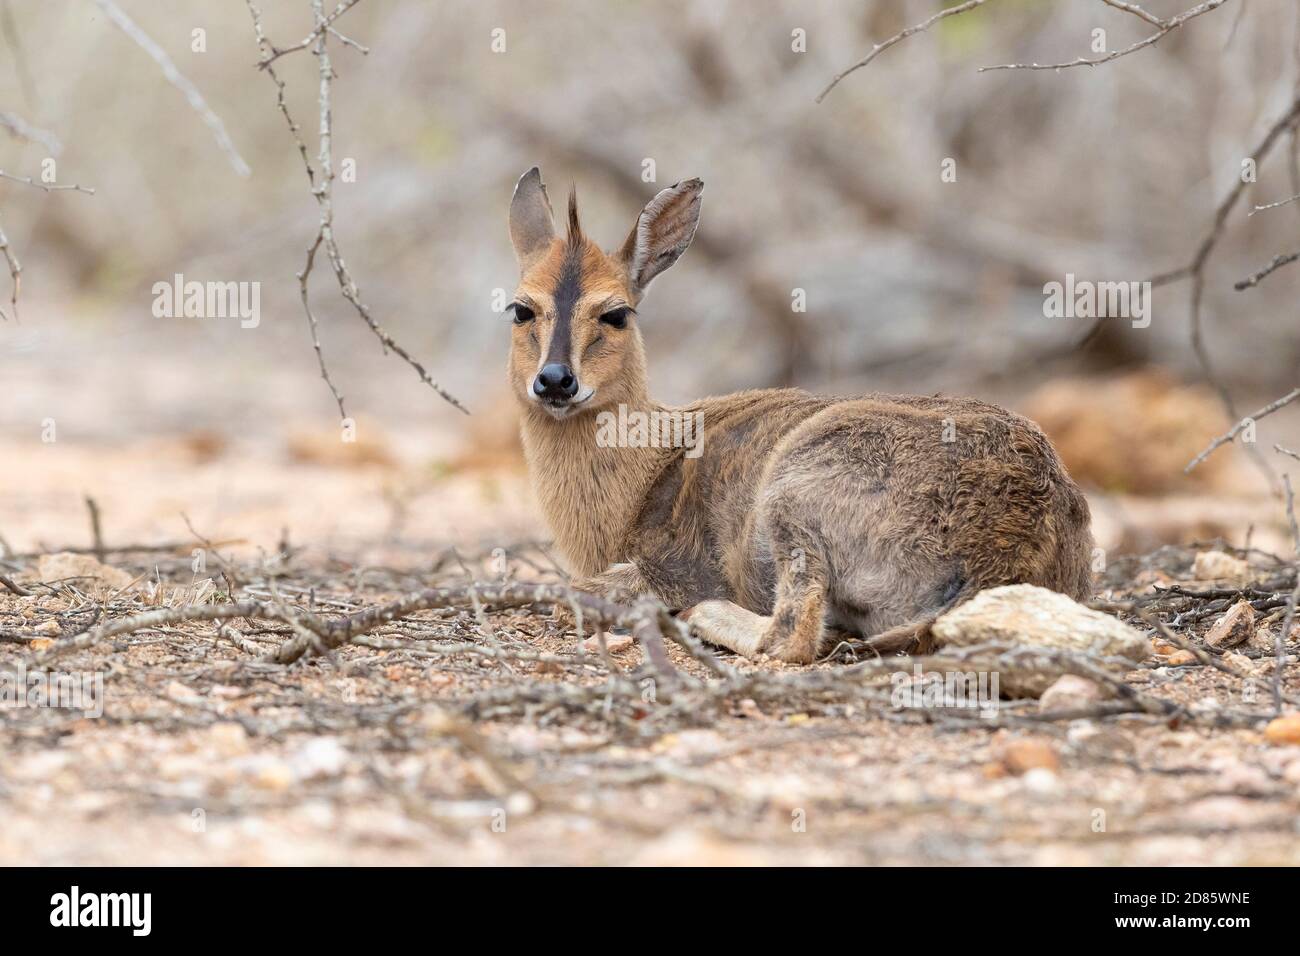 Common Duiker (Sylvicapra grimmia), adult female sitting on the ground, Mpumalanga, South Africa Stock Photo